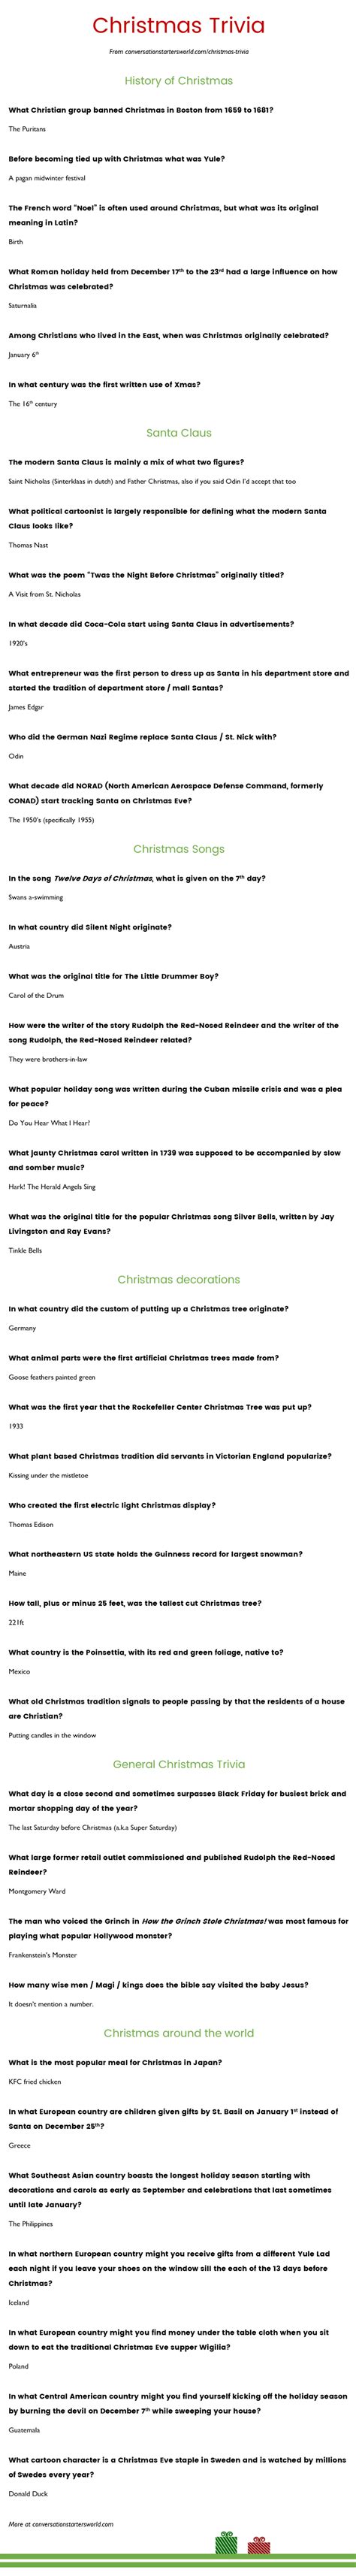 Jun 29, 2017 · one simple solution to the problem of finding trivia questions and answers is to simply print out the questions you find on trivia bliss. 40 Challenging Christmas Trivia Questions - How many can you answer?